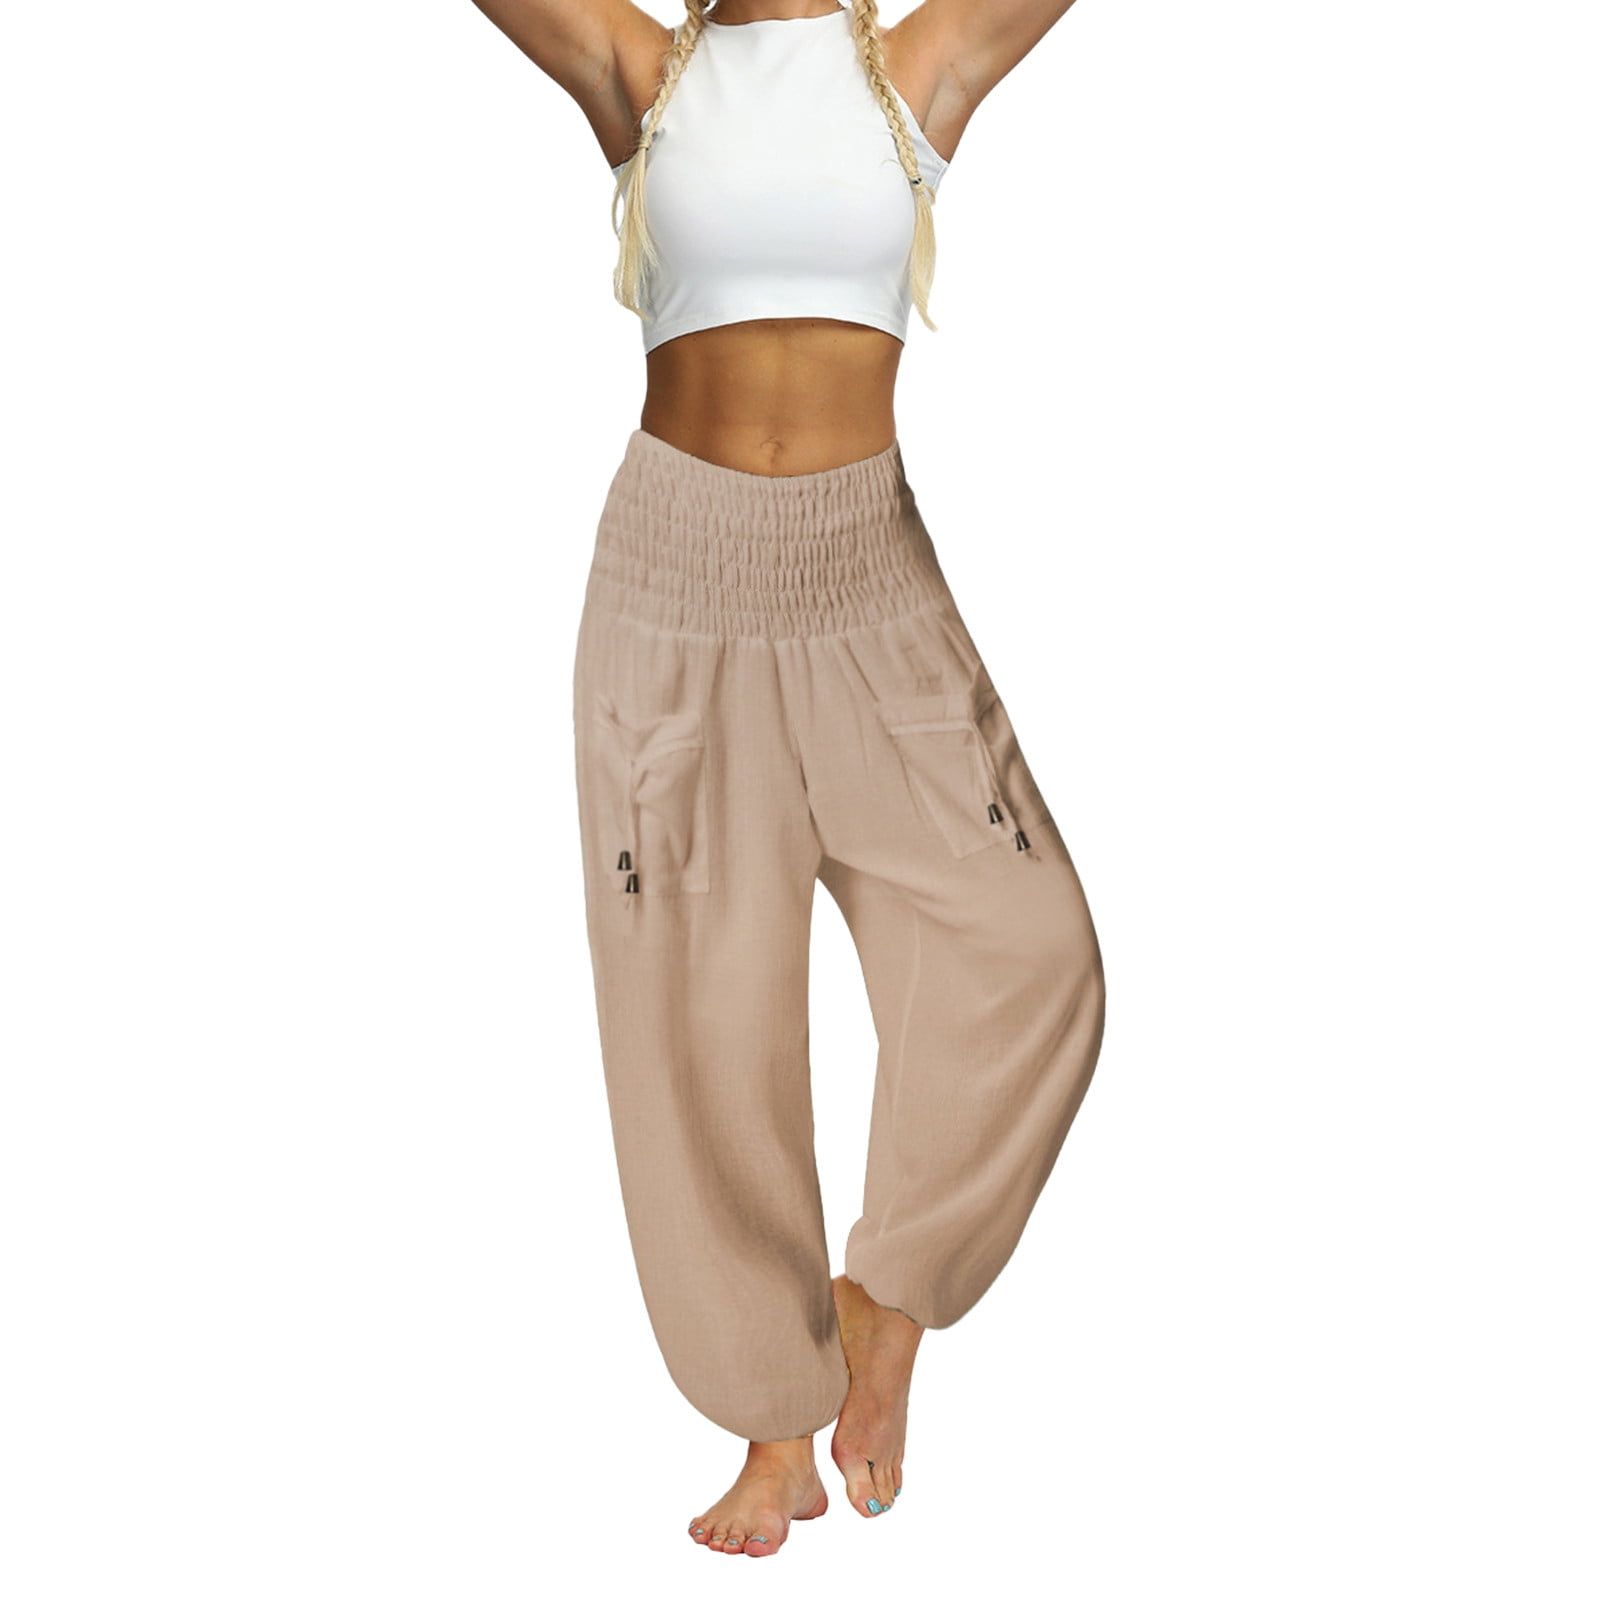 New look harem trousers - Vinted